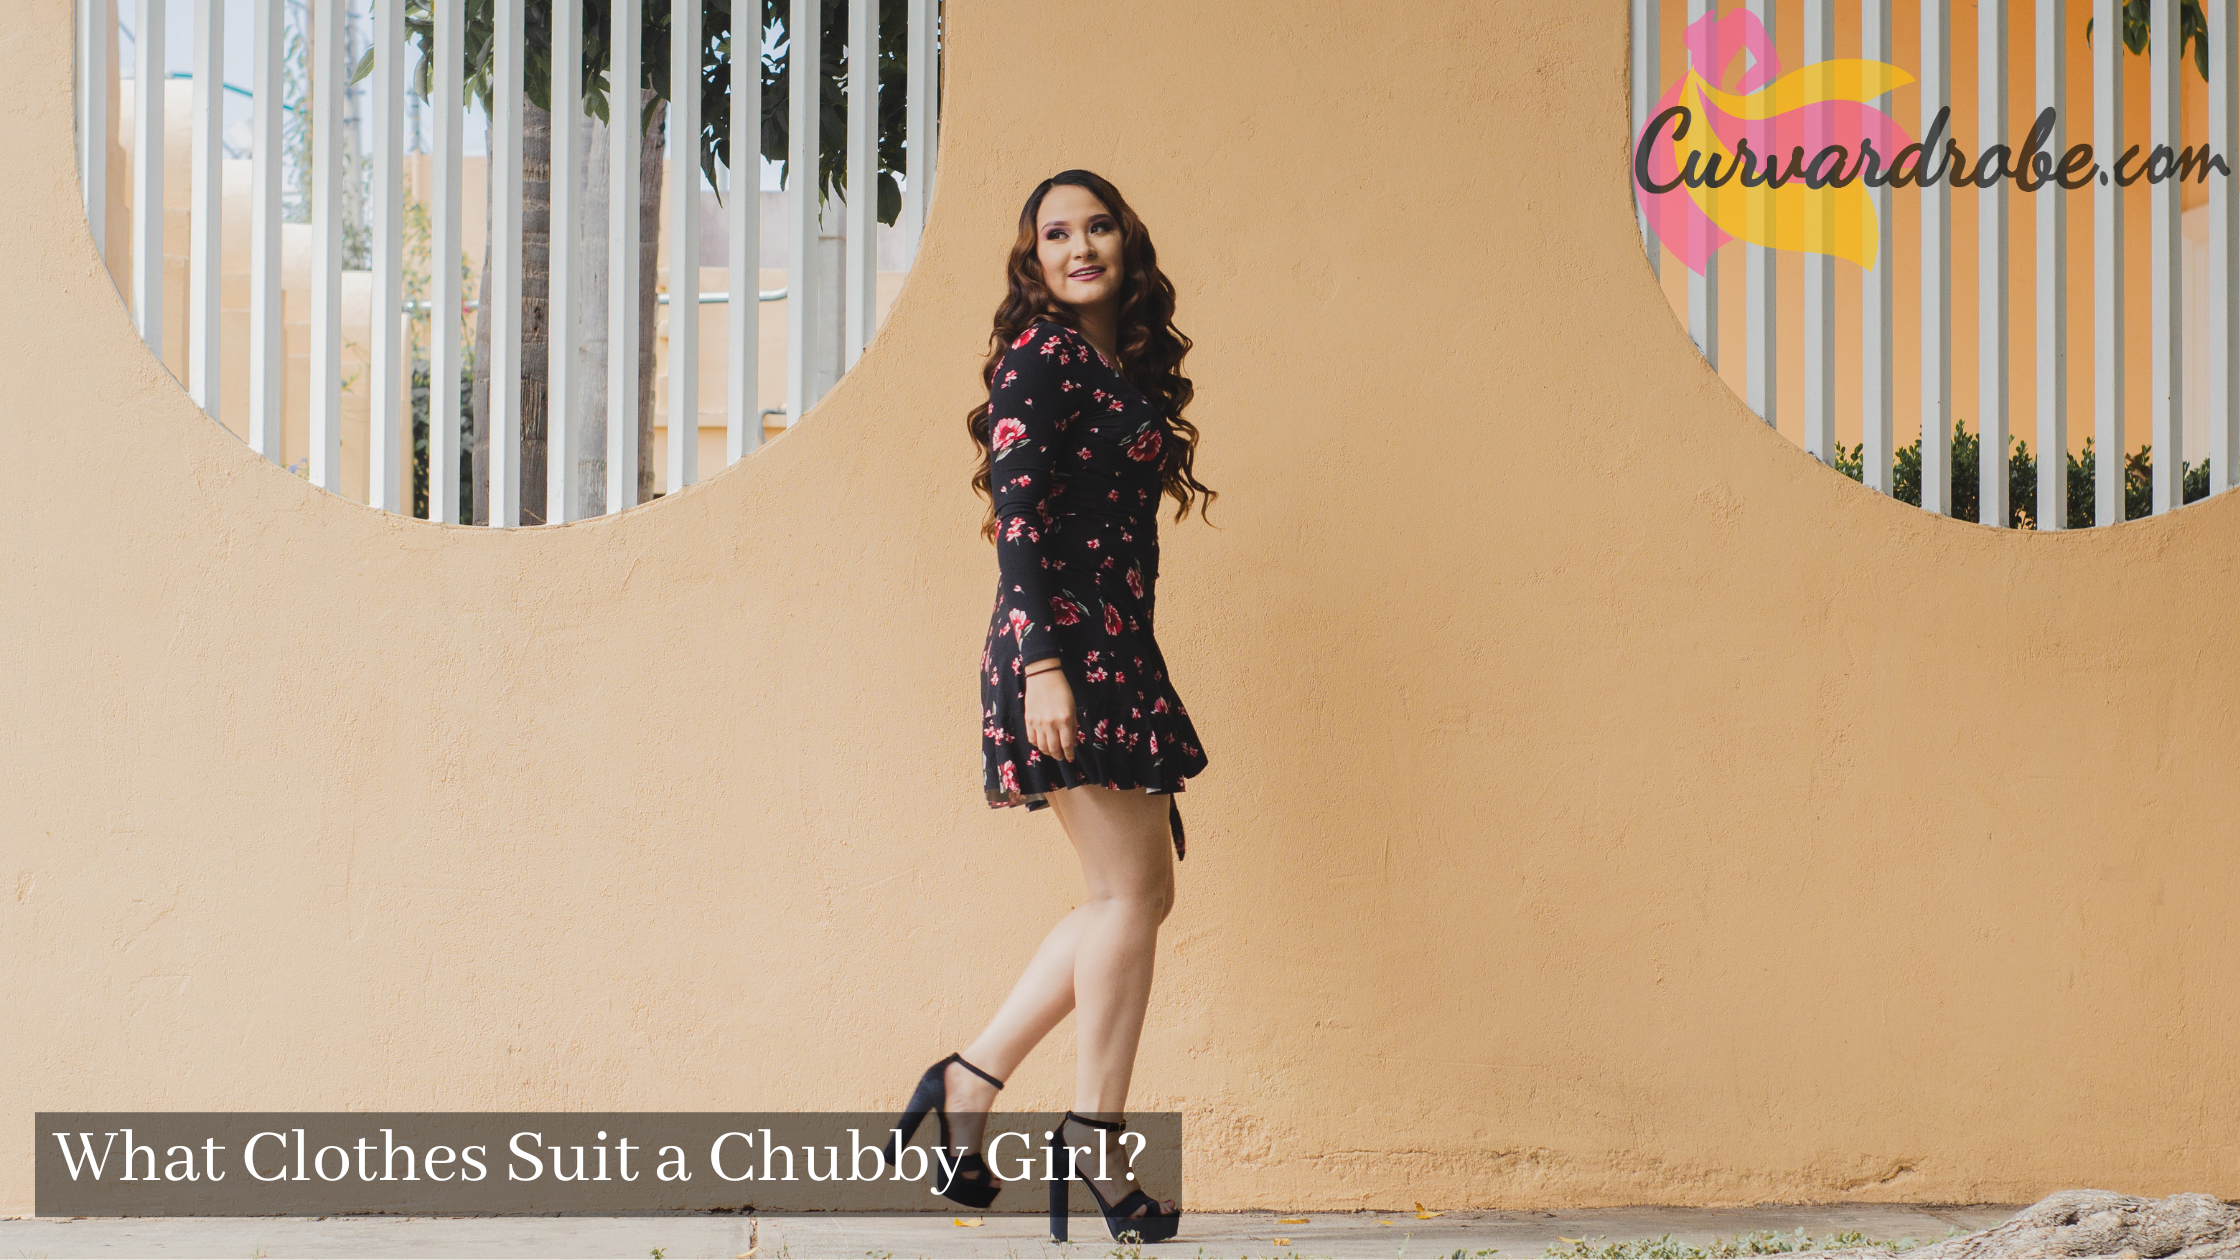 What Clothes Suit a Chubby Girl